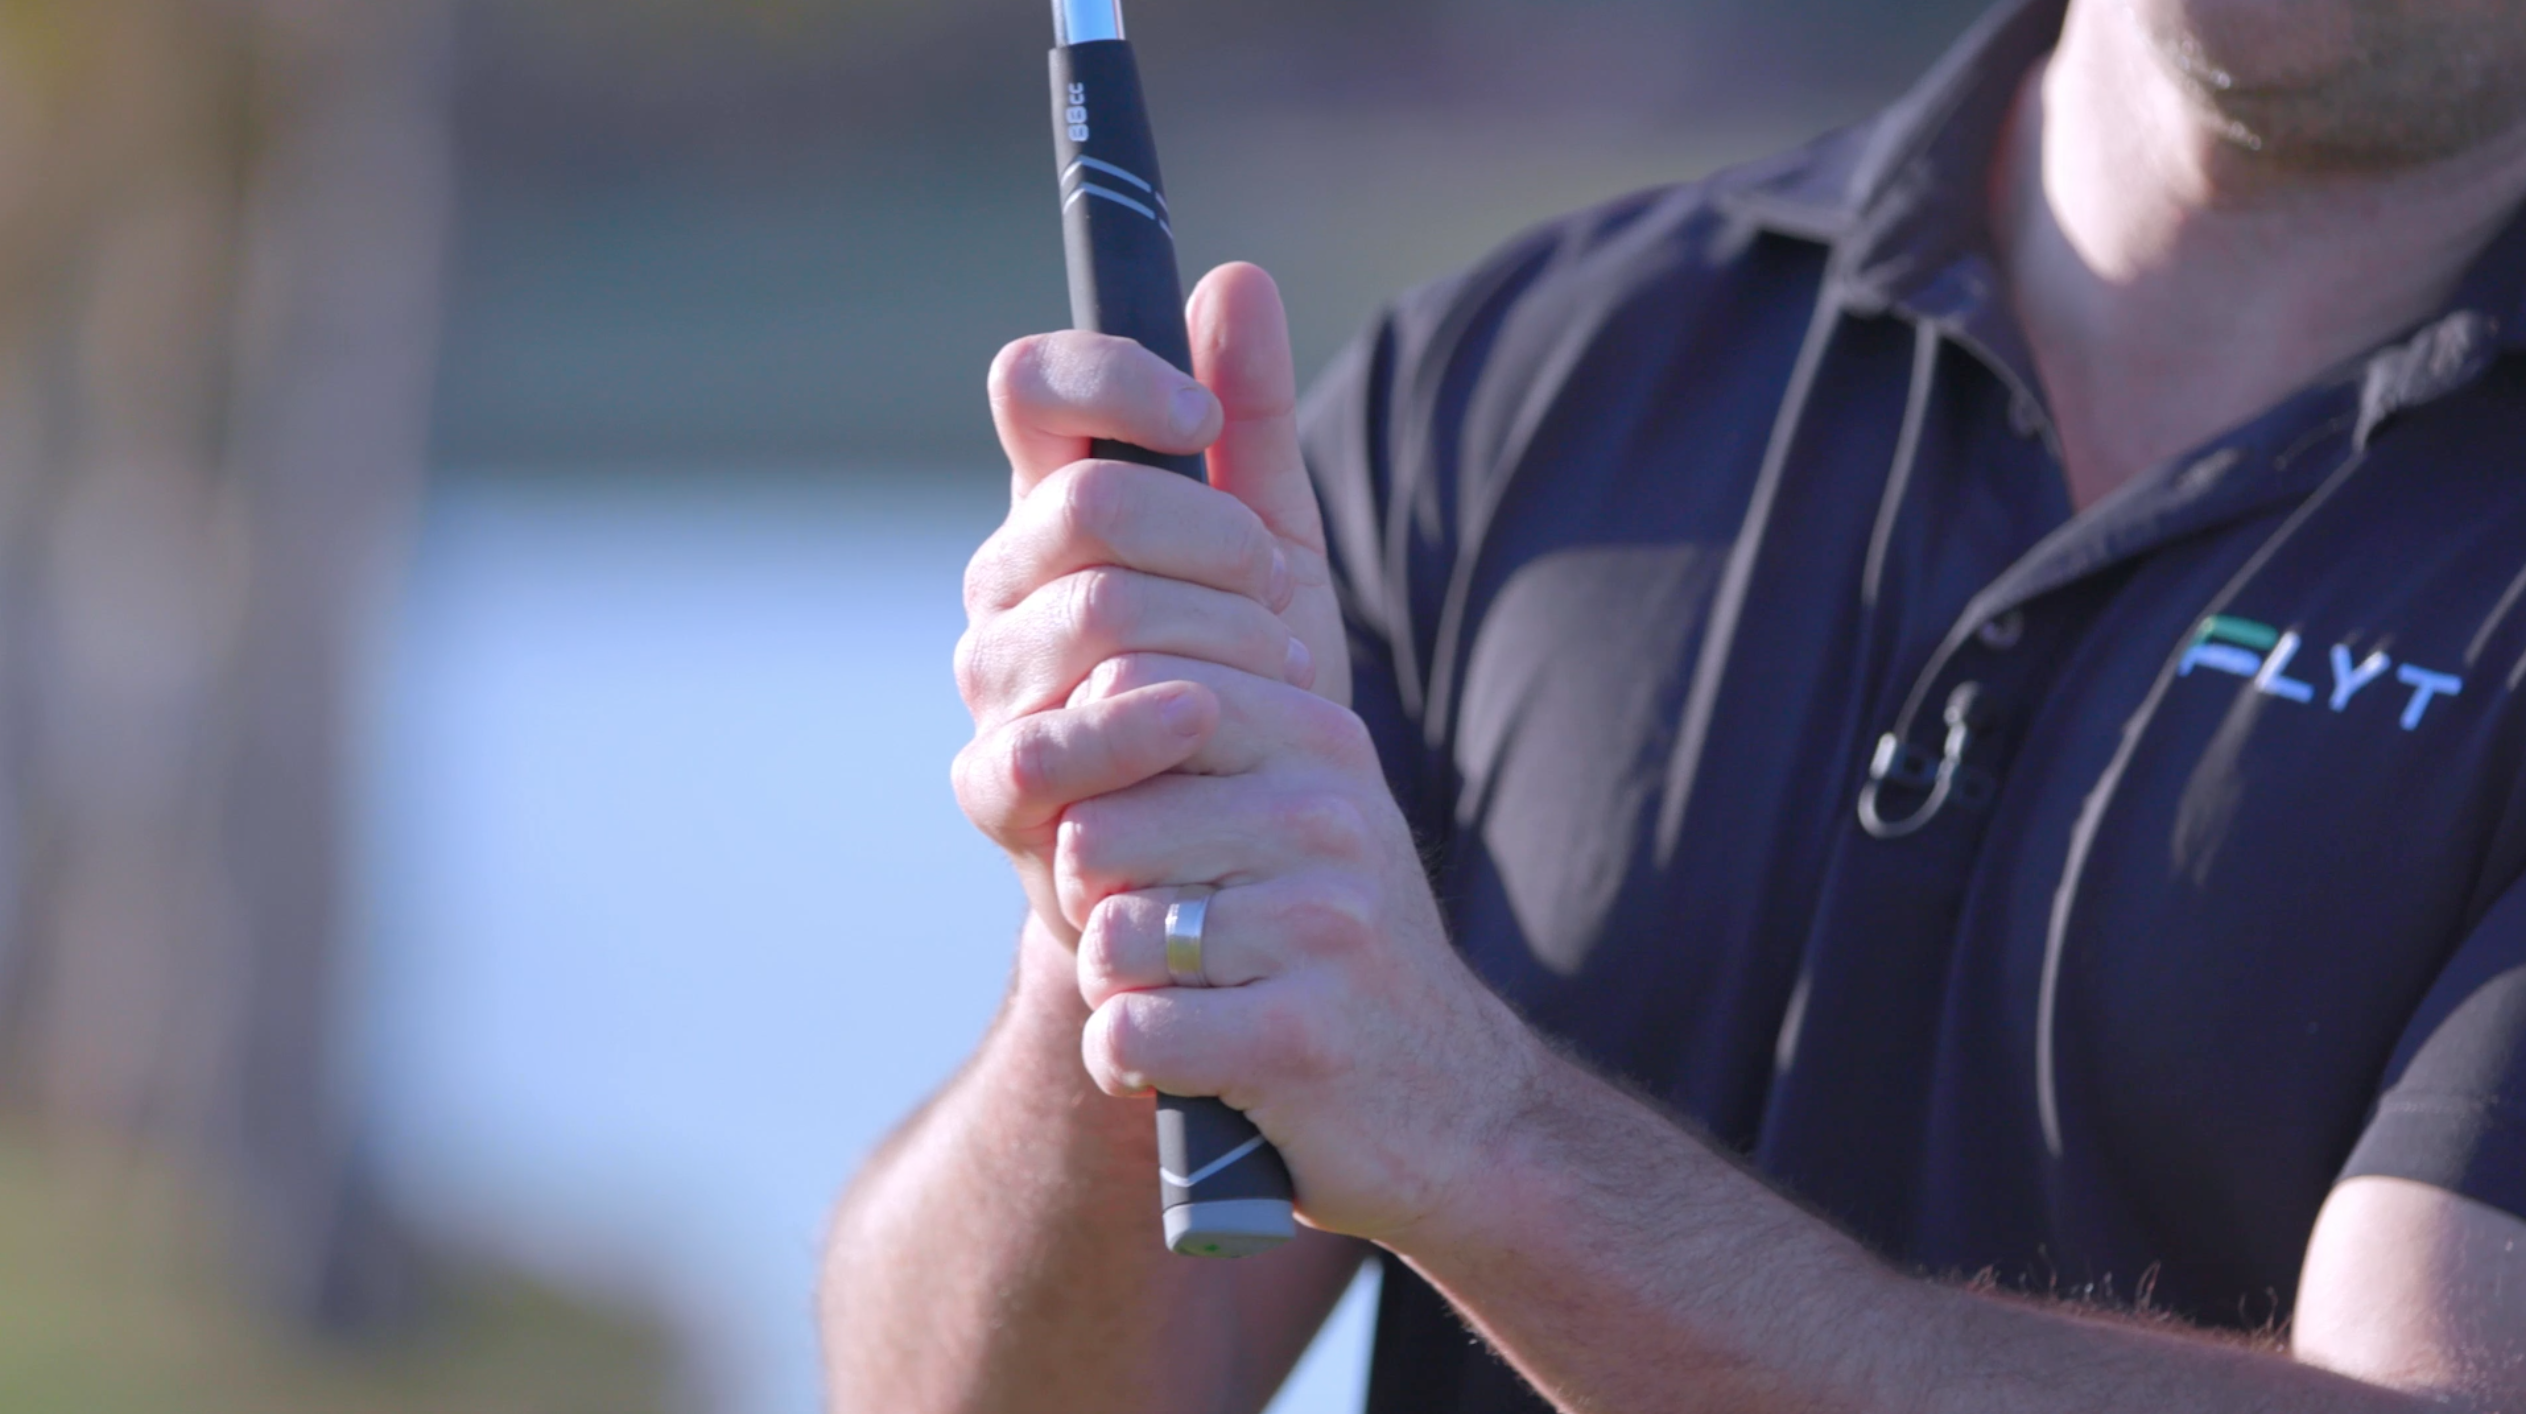 Conventional Grip for Putting